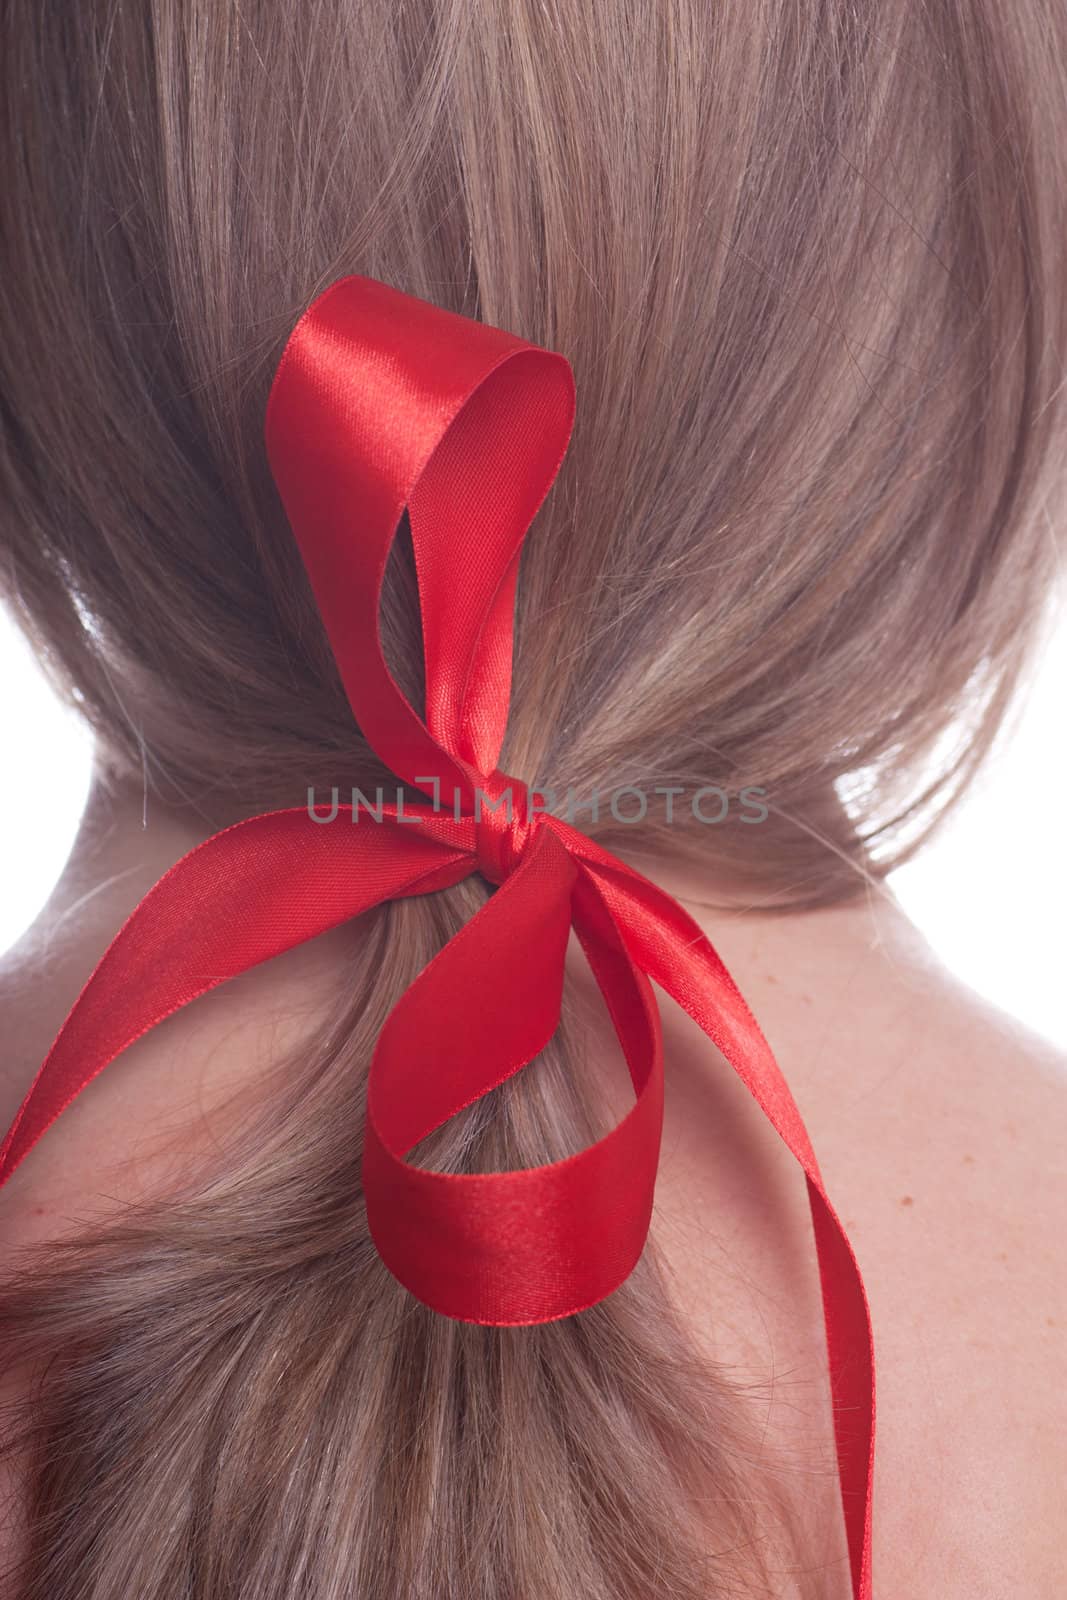 Red bow in a hair by AGorohov